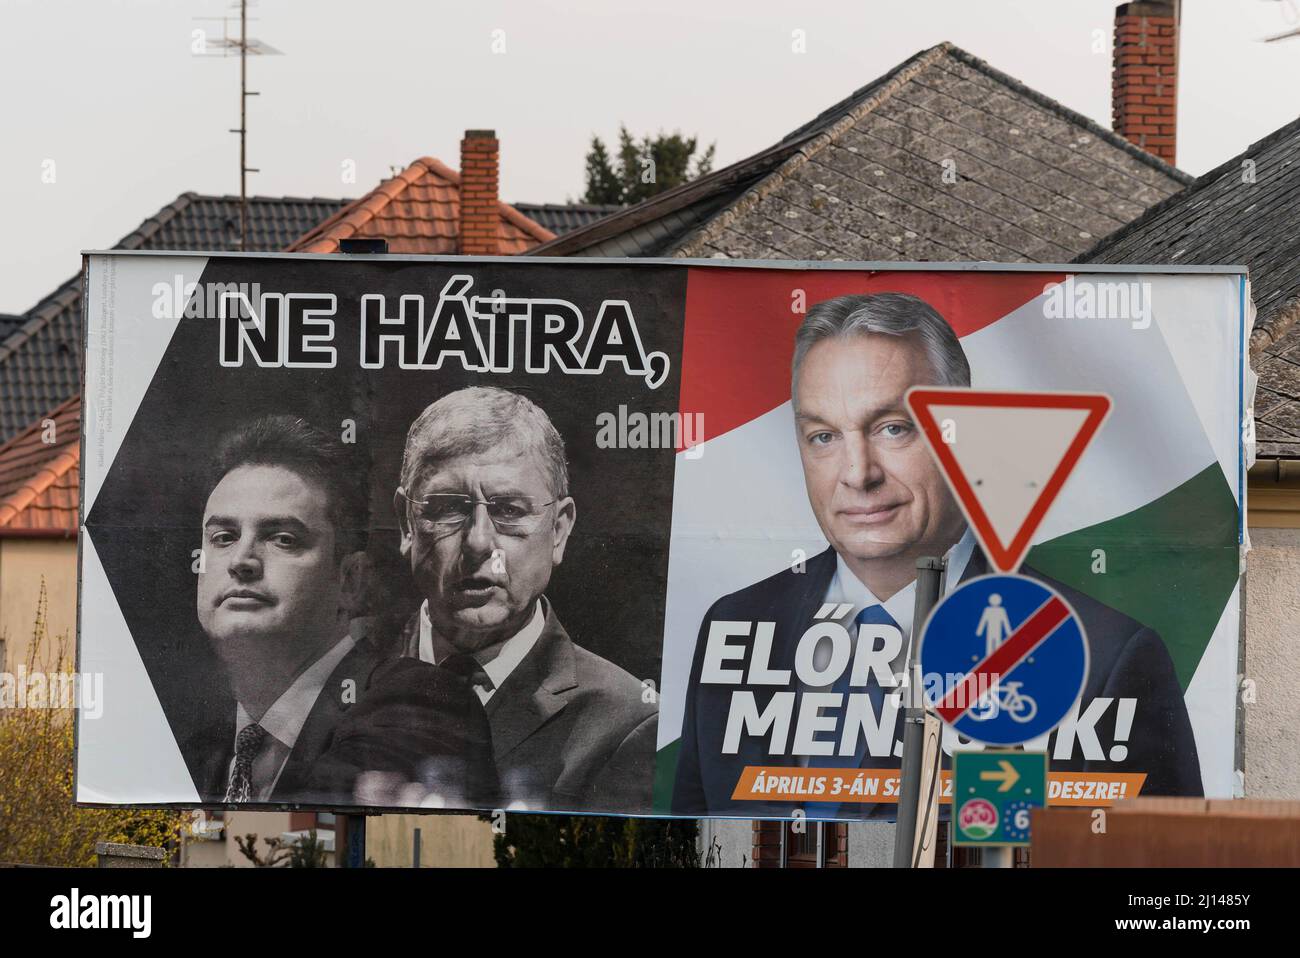 March 18, 2022, Mosonmagyarovar, Hungary: Election billboard for Fidesz party placed on the street of Mosonmagyarovar. On the billboard (from left to right) the leader of opposition Peter Marki-Zay, former prime minister Ferenc Gyurcsany, and Hungarian prime minister and leader of Fidesz Viktor Orban. Mosonmagyarovar is the town in northwest Hungary located approx. 160 kilometers from Hungarian capital Budapest. Peter Marki-Zay will challenge prime minister Viktor Orban in the upcoming parliamentary elections, which will be held on the 3rd of April 2022. (Credit Image: © Tomas Tkacik/SOPA Imag Stock Photo